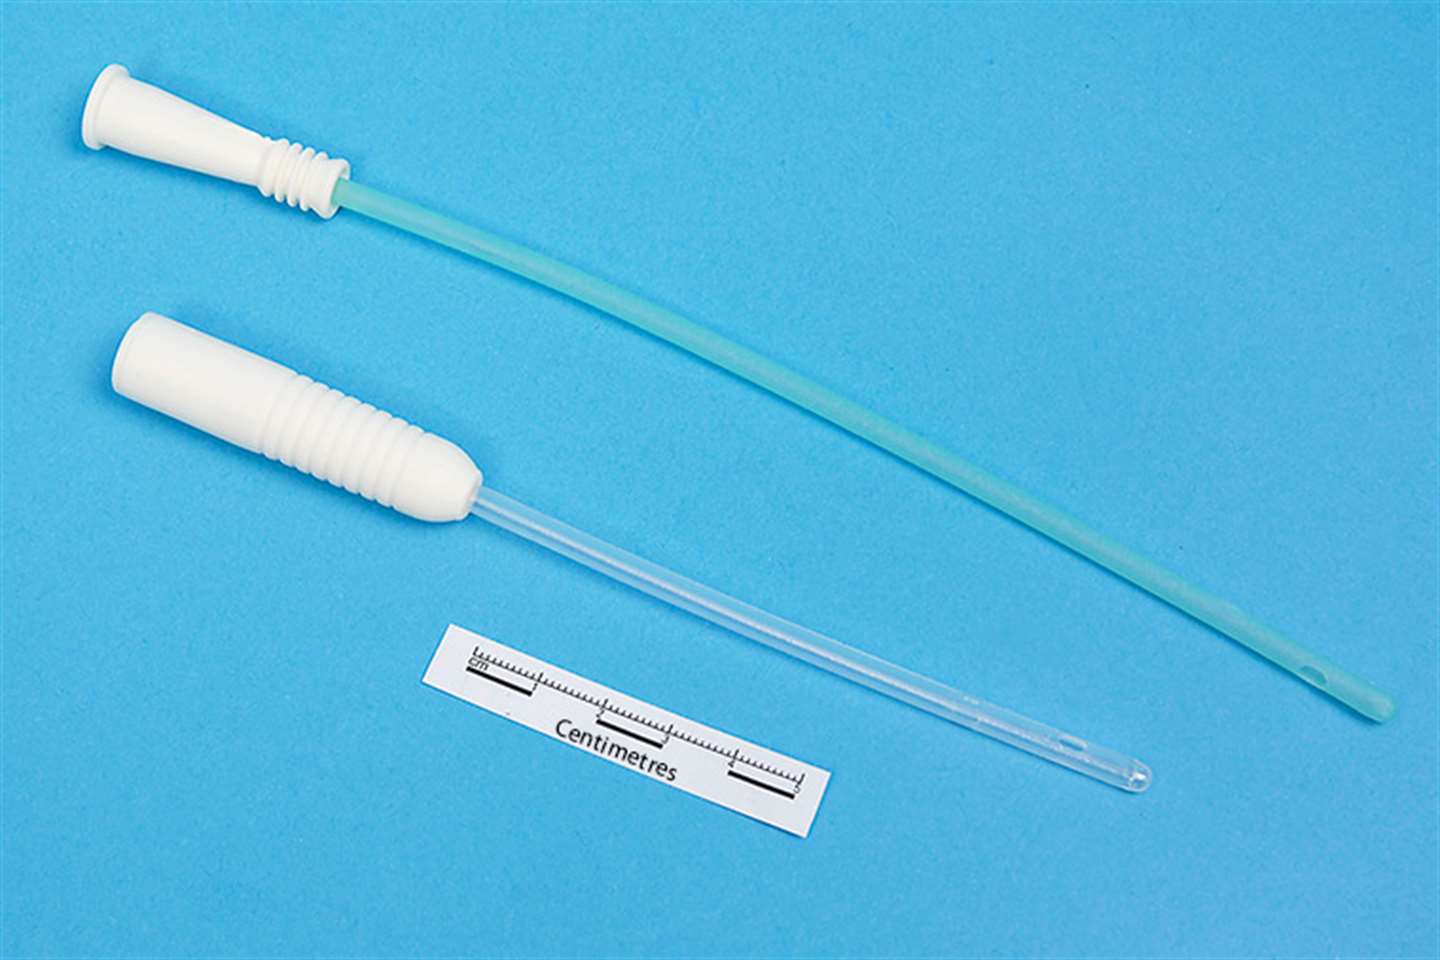 Intermittent catheters in different lengths